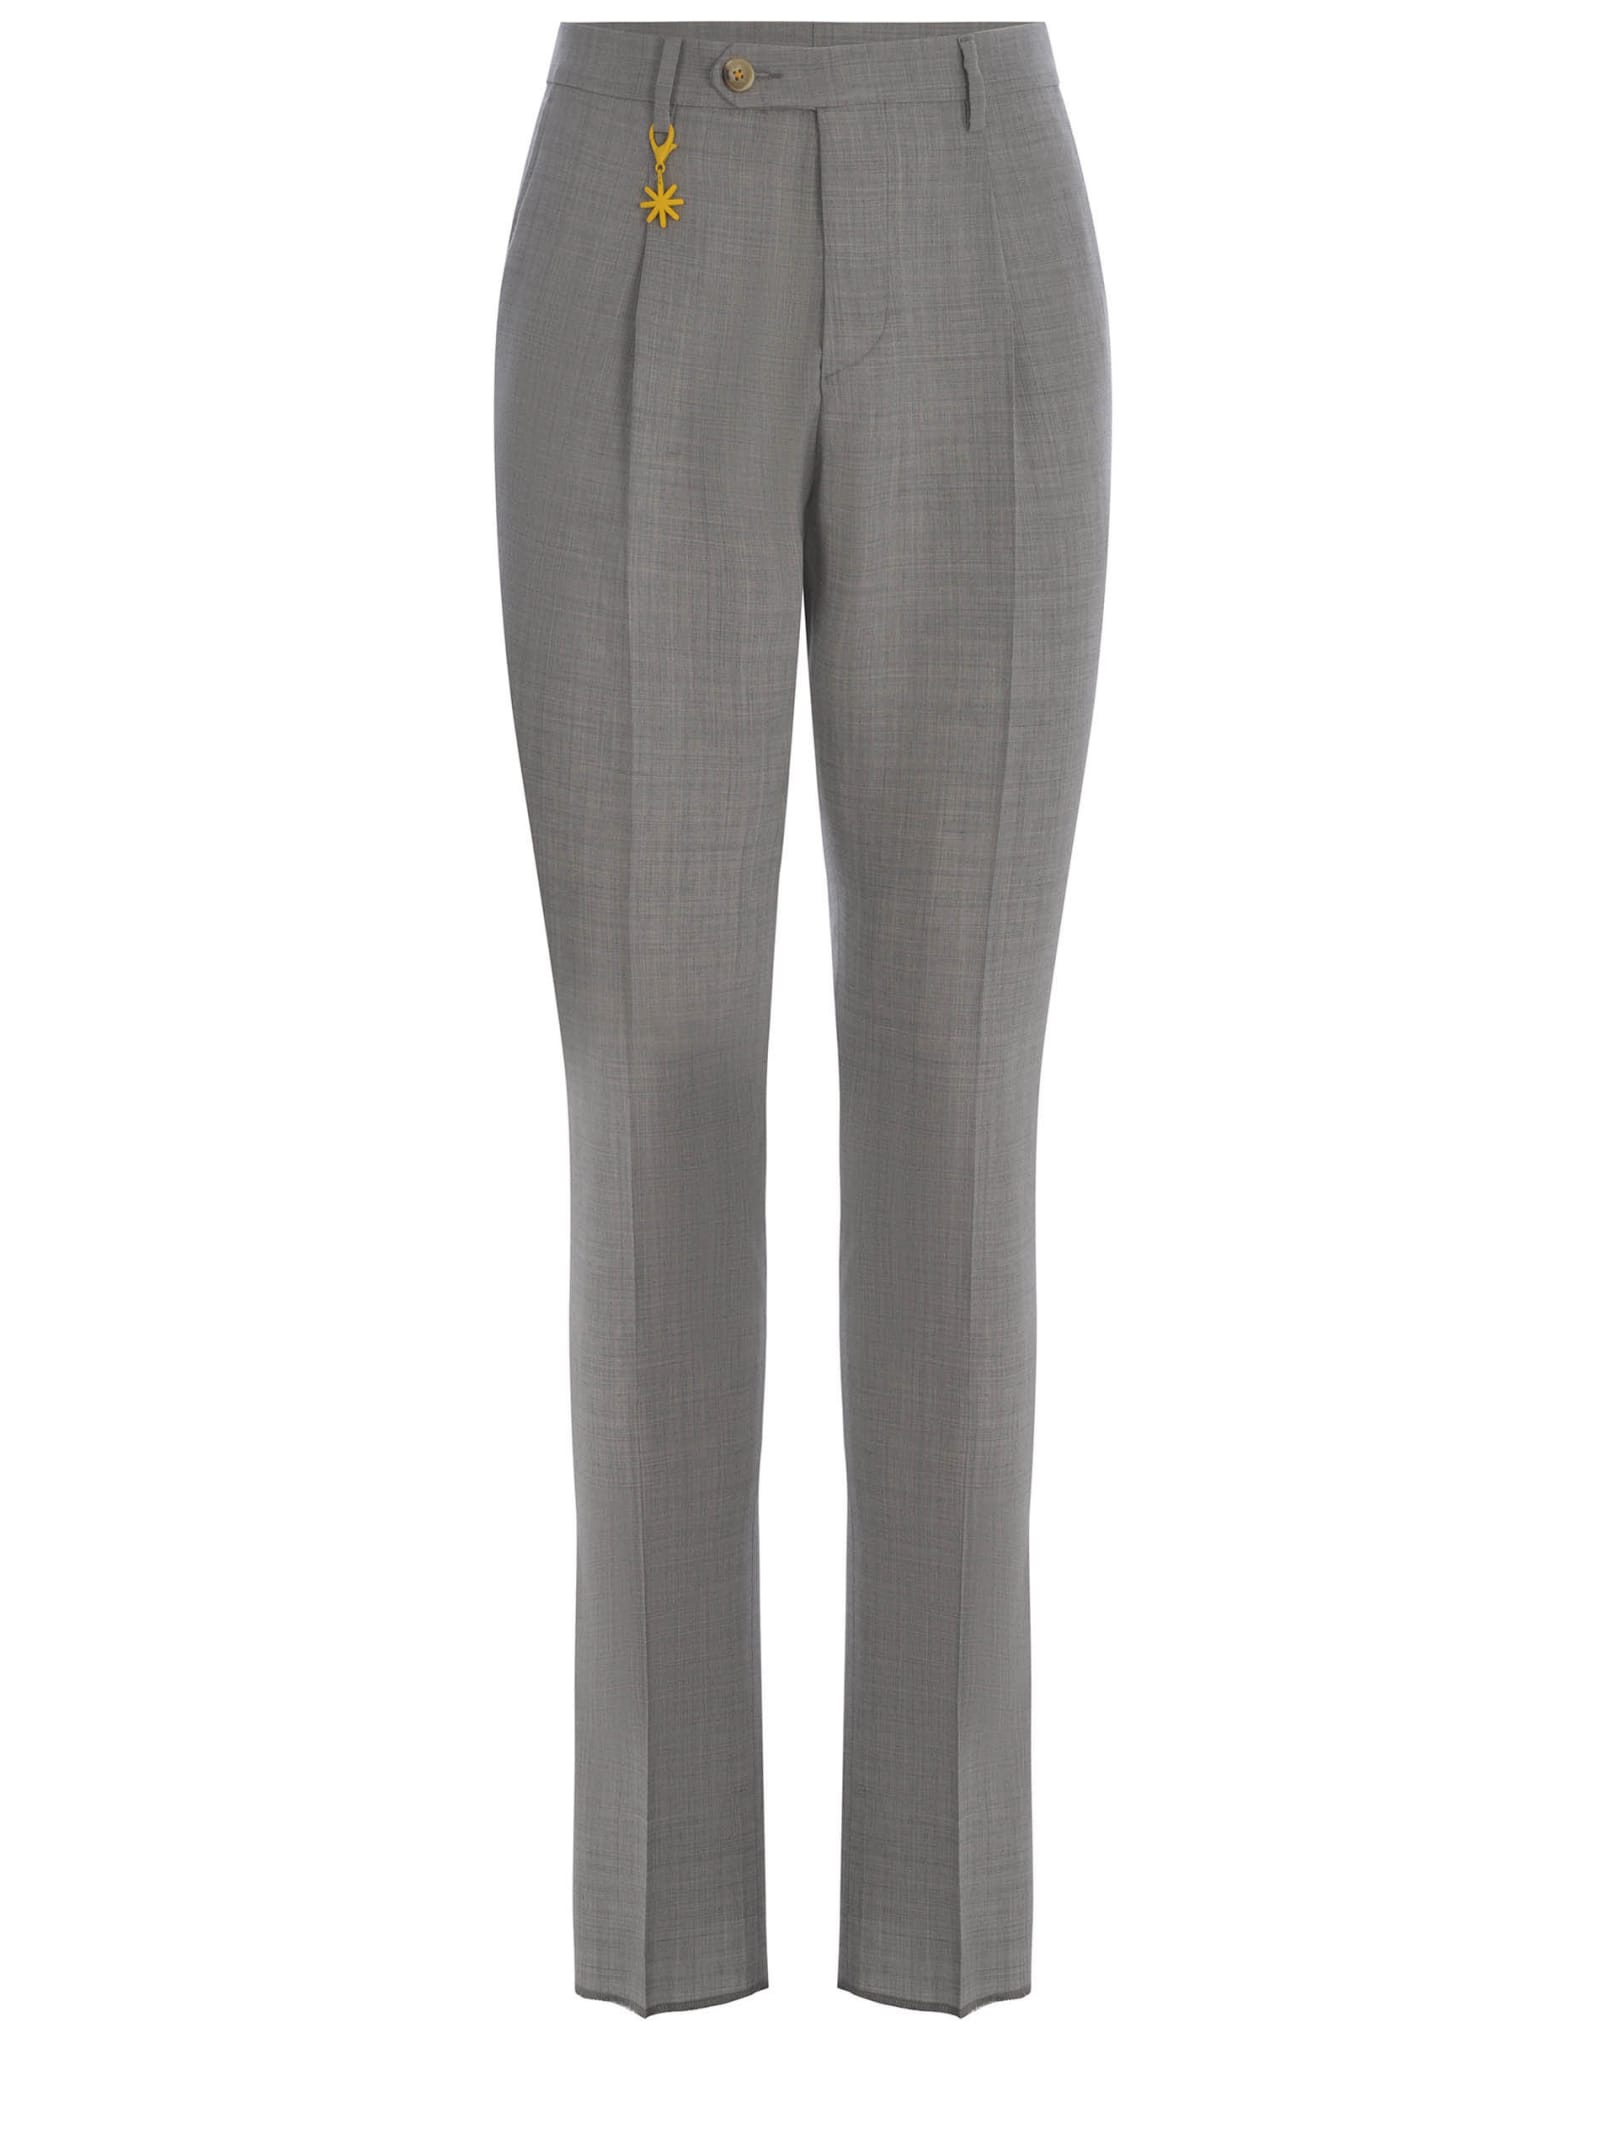 Shop Manuel Ritz Trousers  Made Of Wool Canvas In Grigio Chiaro